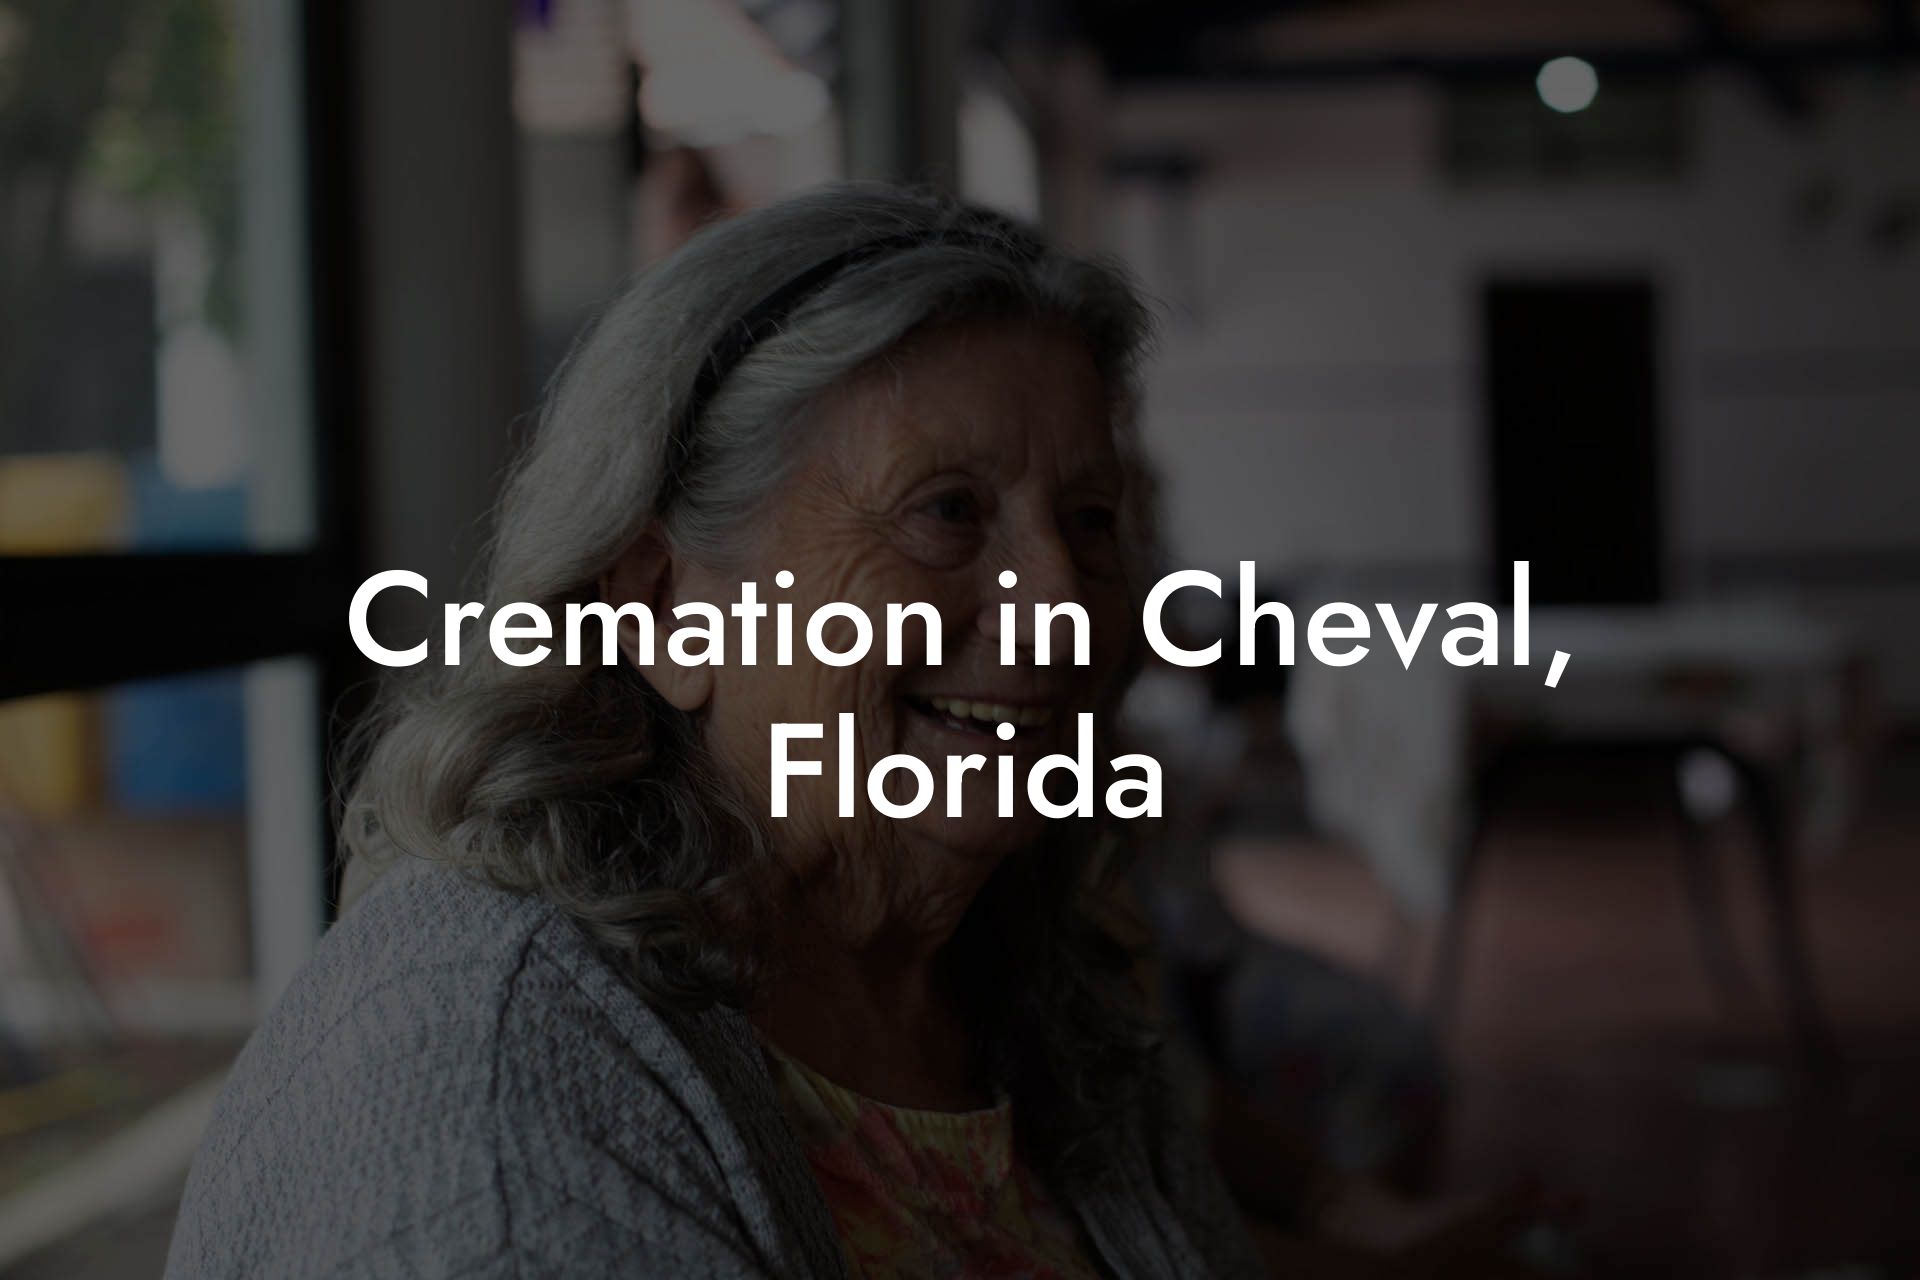 Cremation in Cheval, Florida